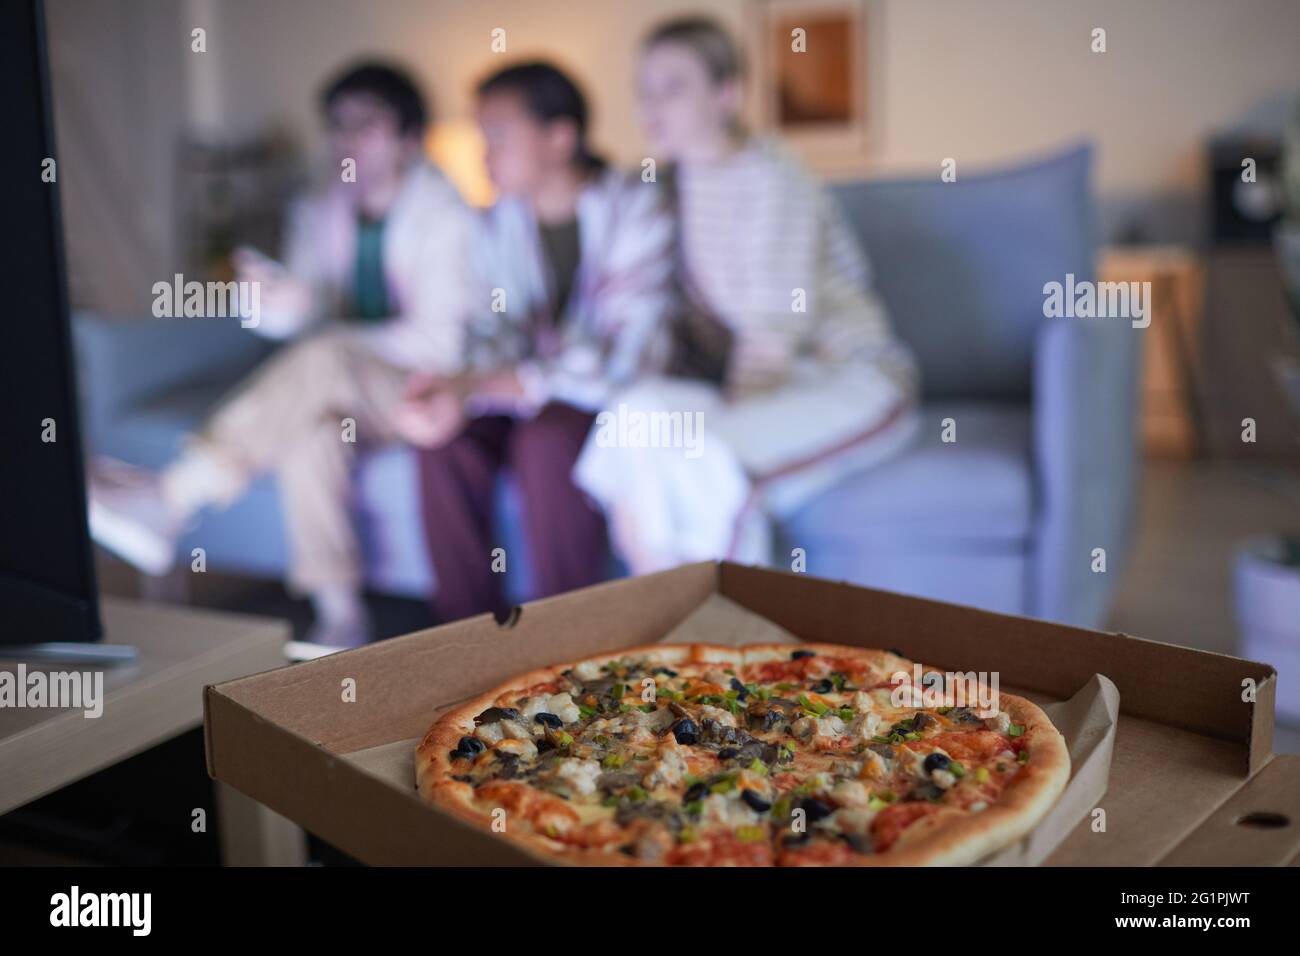 Blurred group of friends watching TV at home lit by blue light, focus on pizza in foreground, copy space Stock Photo